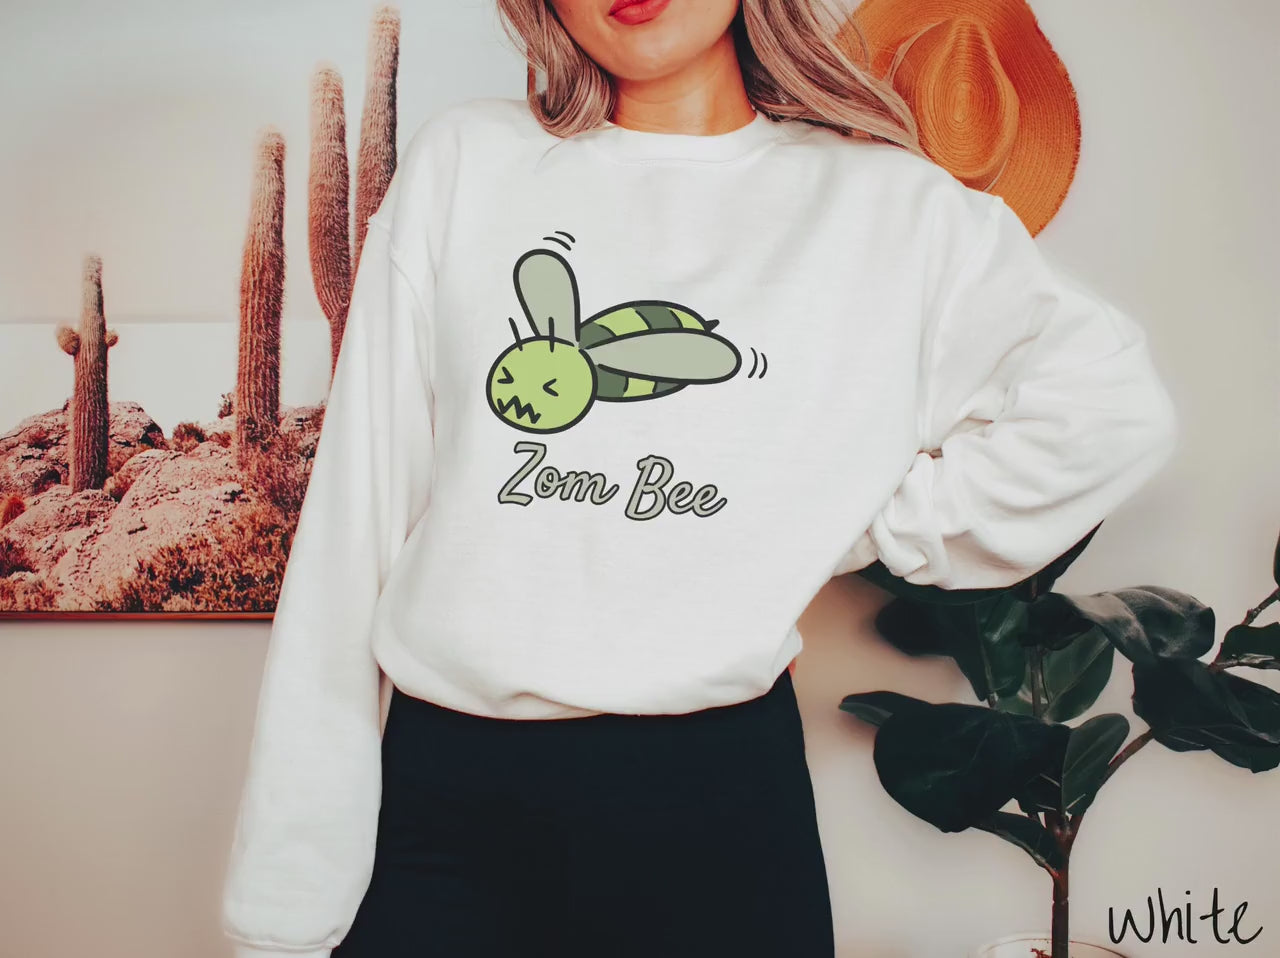 The Zom Bee Sweatshirt, Gift this Funny Zombie Beekeeping Sweater to your Pun-Loving Friends!